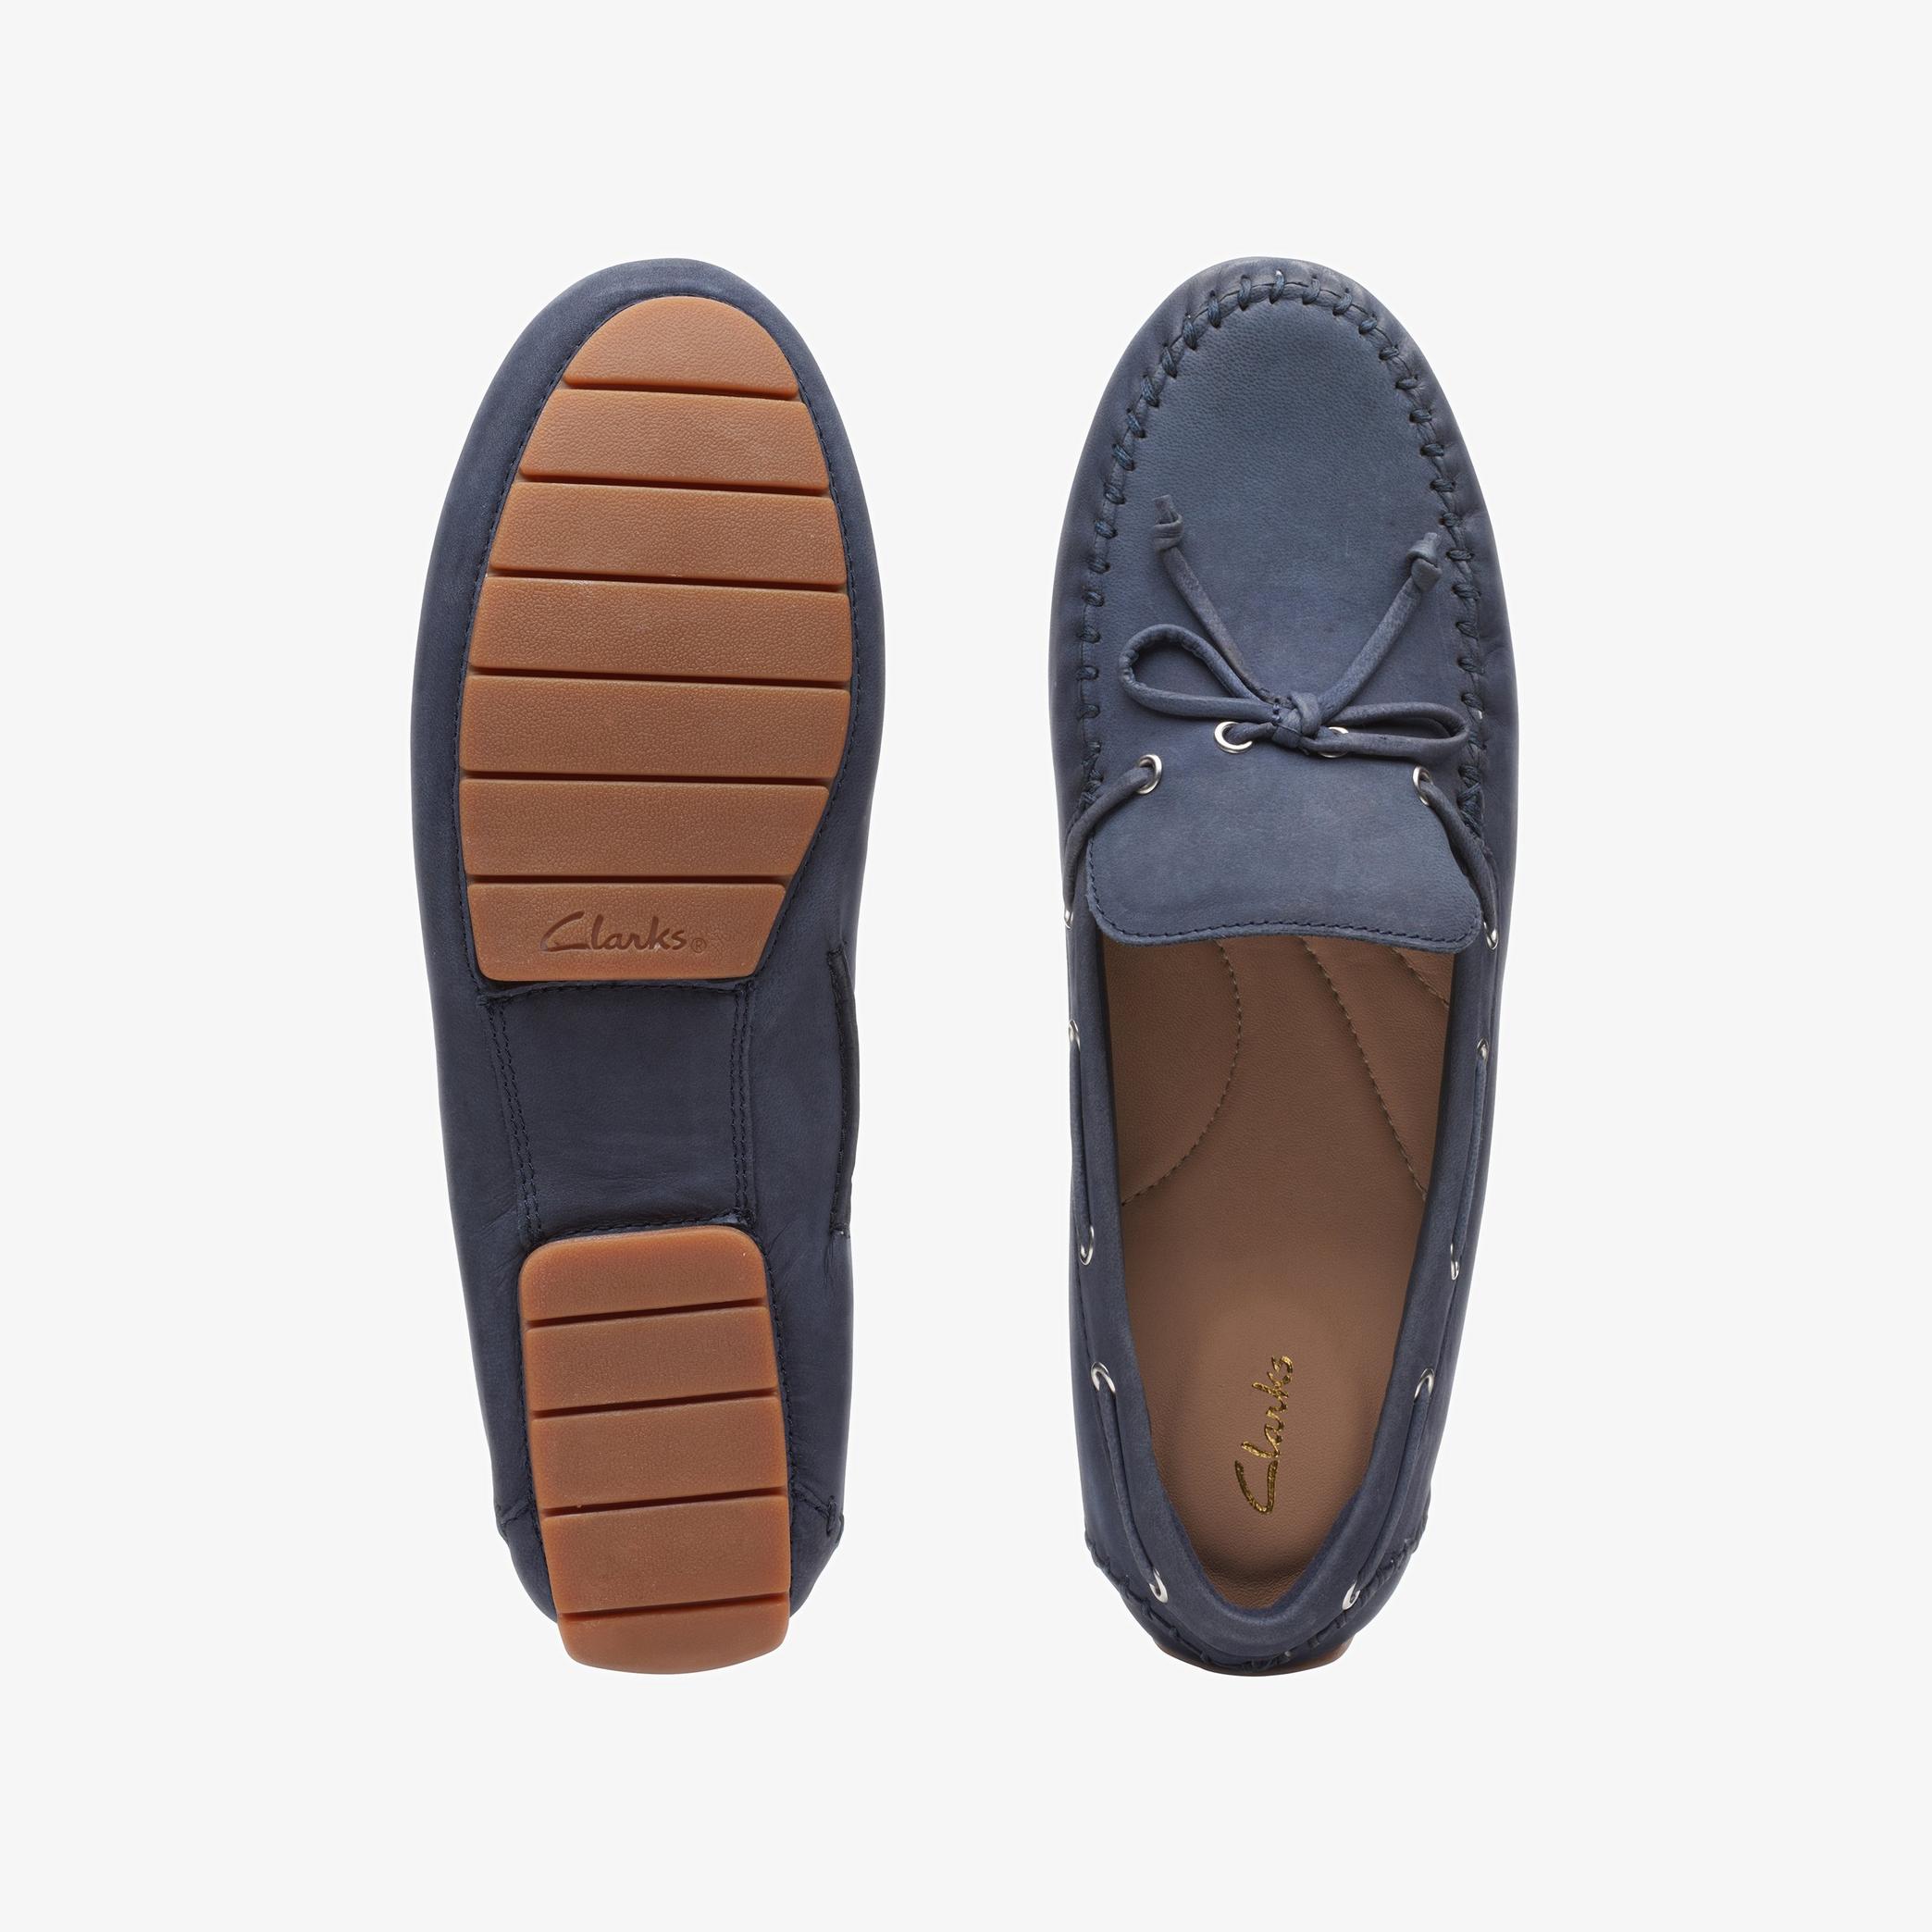 C Mocc Tie Navy Nubuck Loafers, view 6 of 6